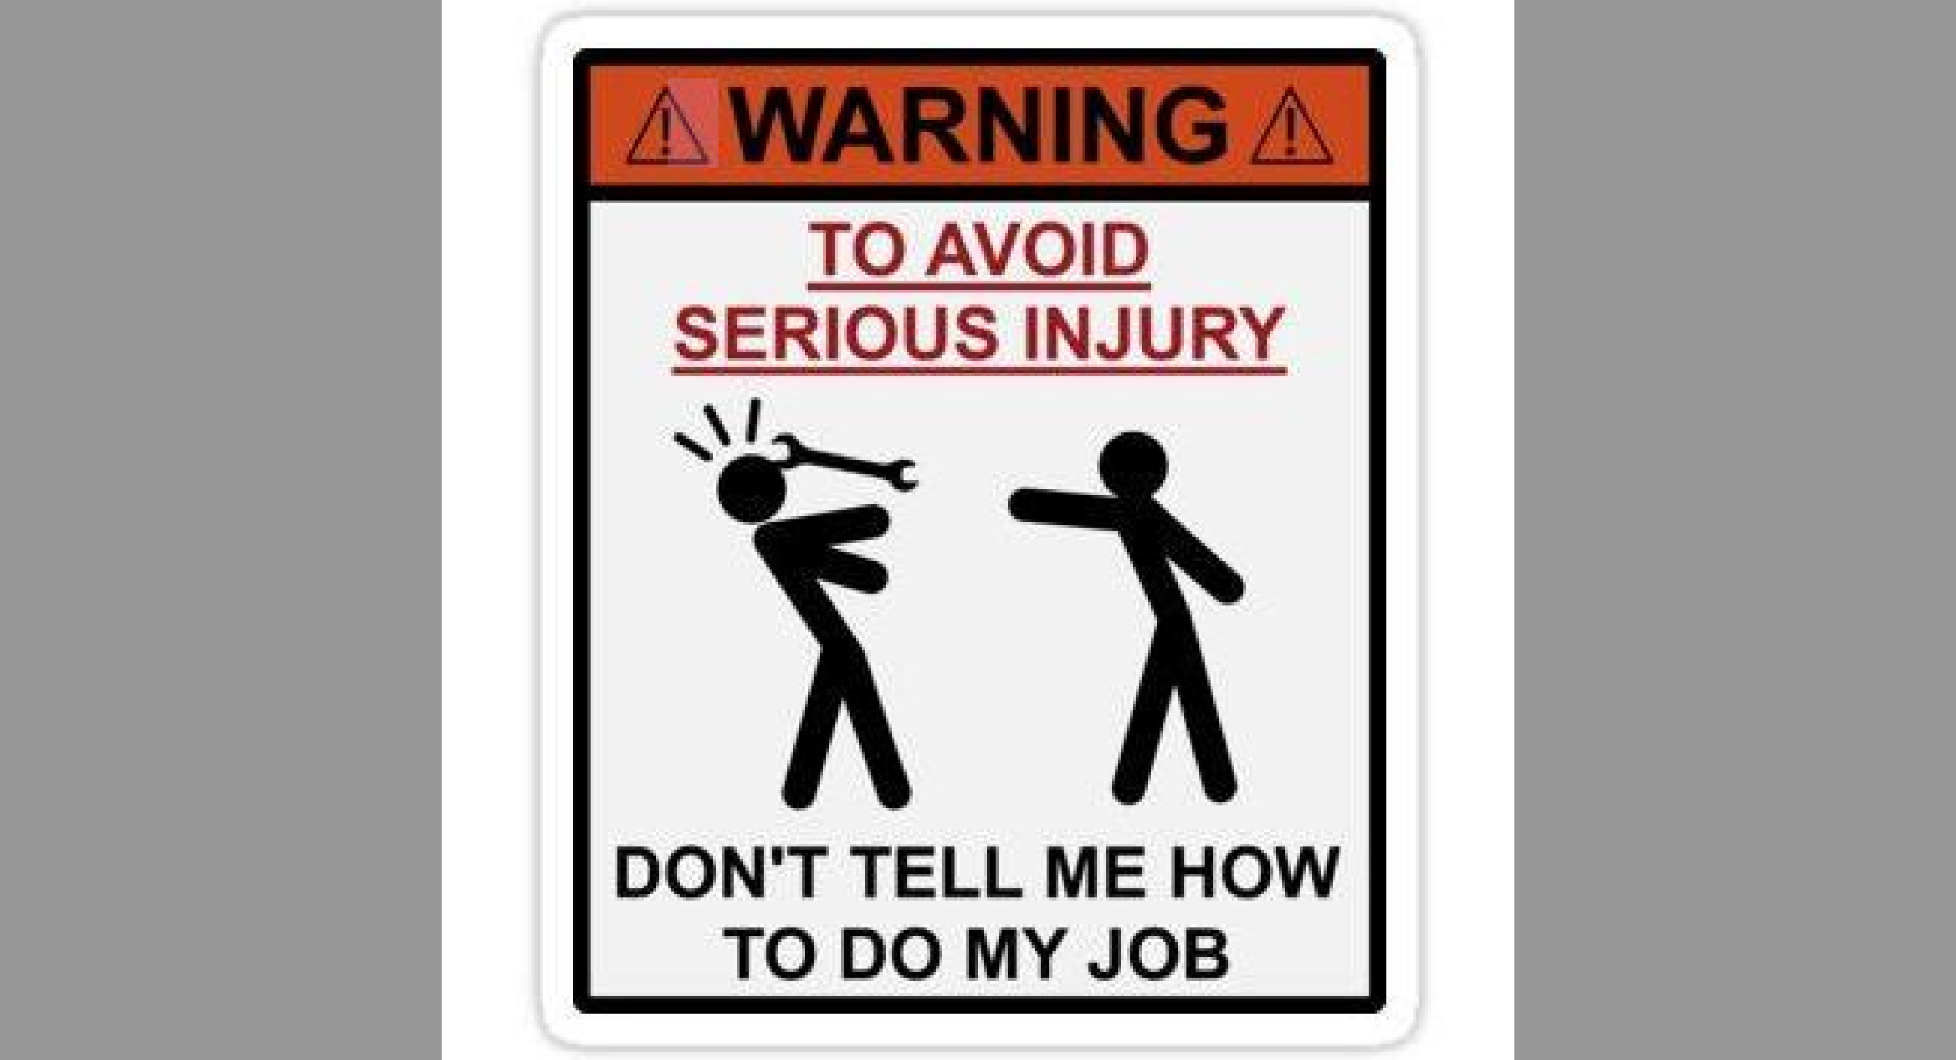 Don't tell me how to do my job. Warning don't tell me how to do my job. Don't tell me how to do my job poster. To avoid injury don't tell me how to do my job перевод. I tell end